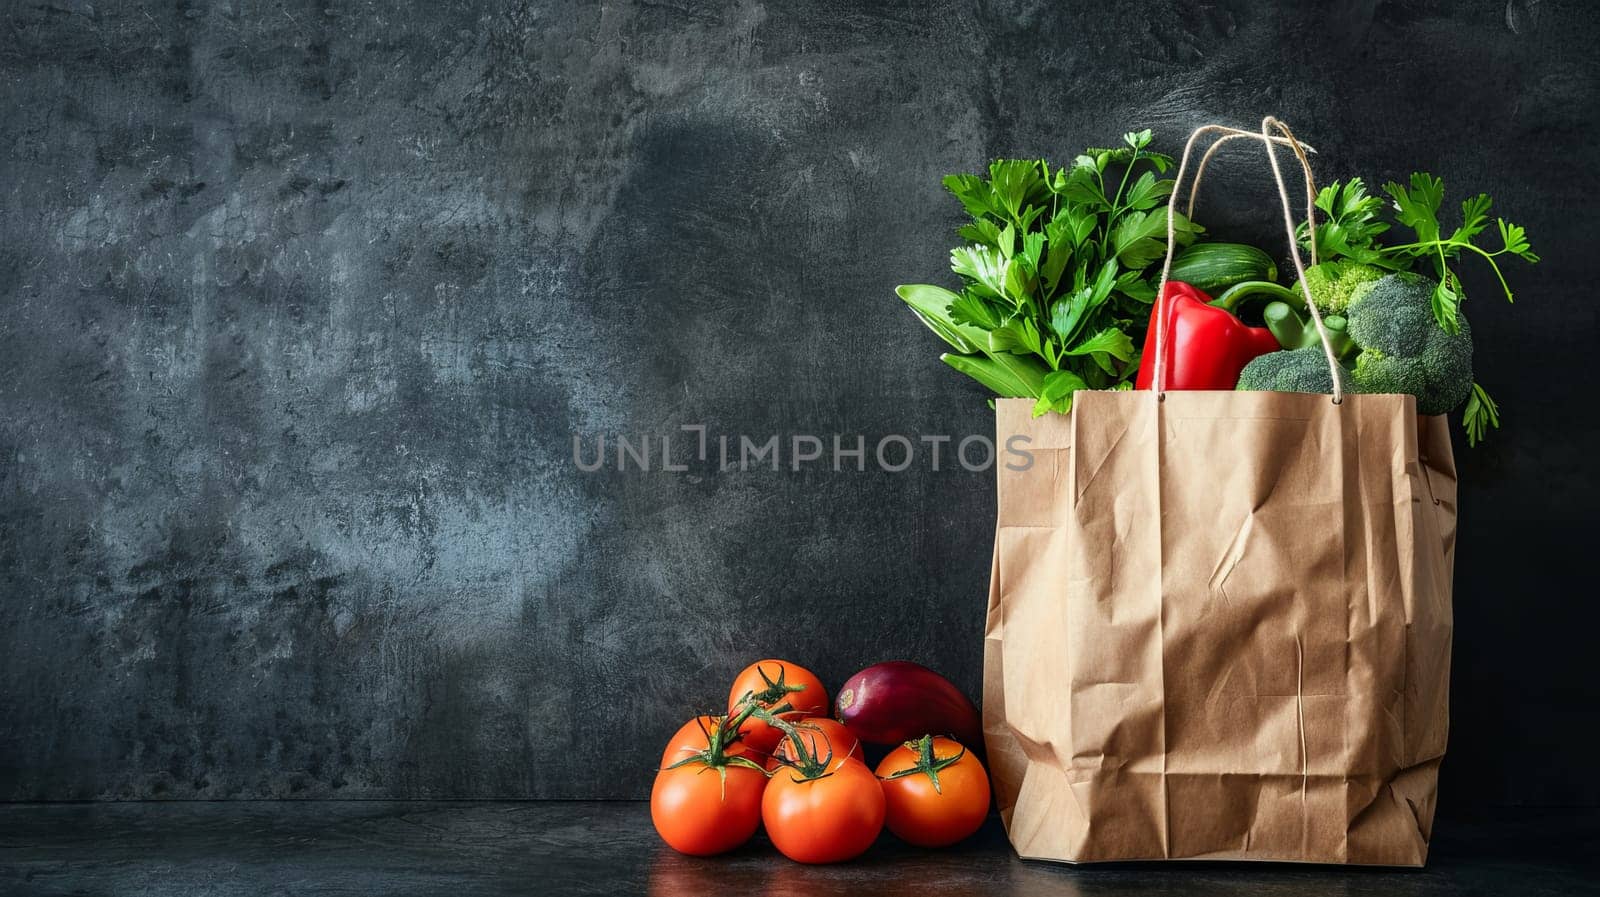 A bag of vegetables sits on a counter next to a wall. The vegetables include tomatoes, broccoli, and peppers